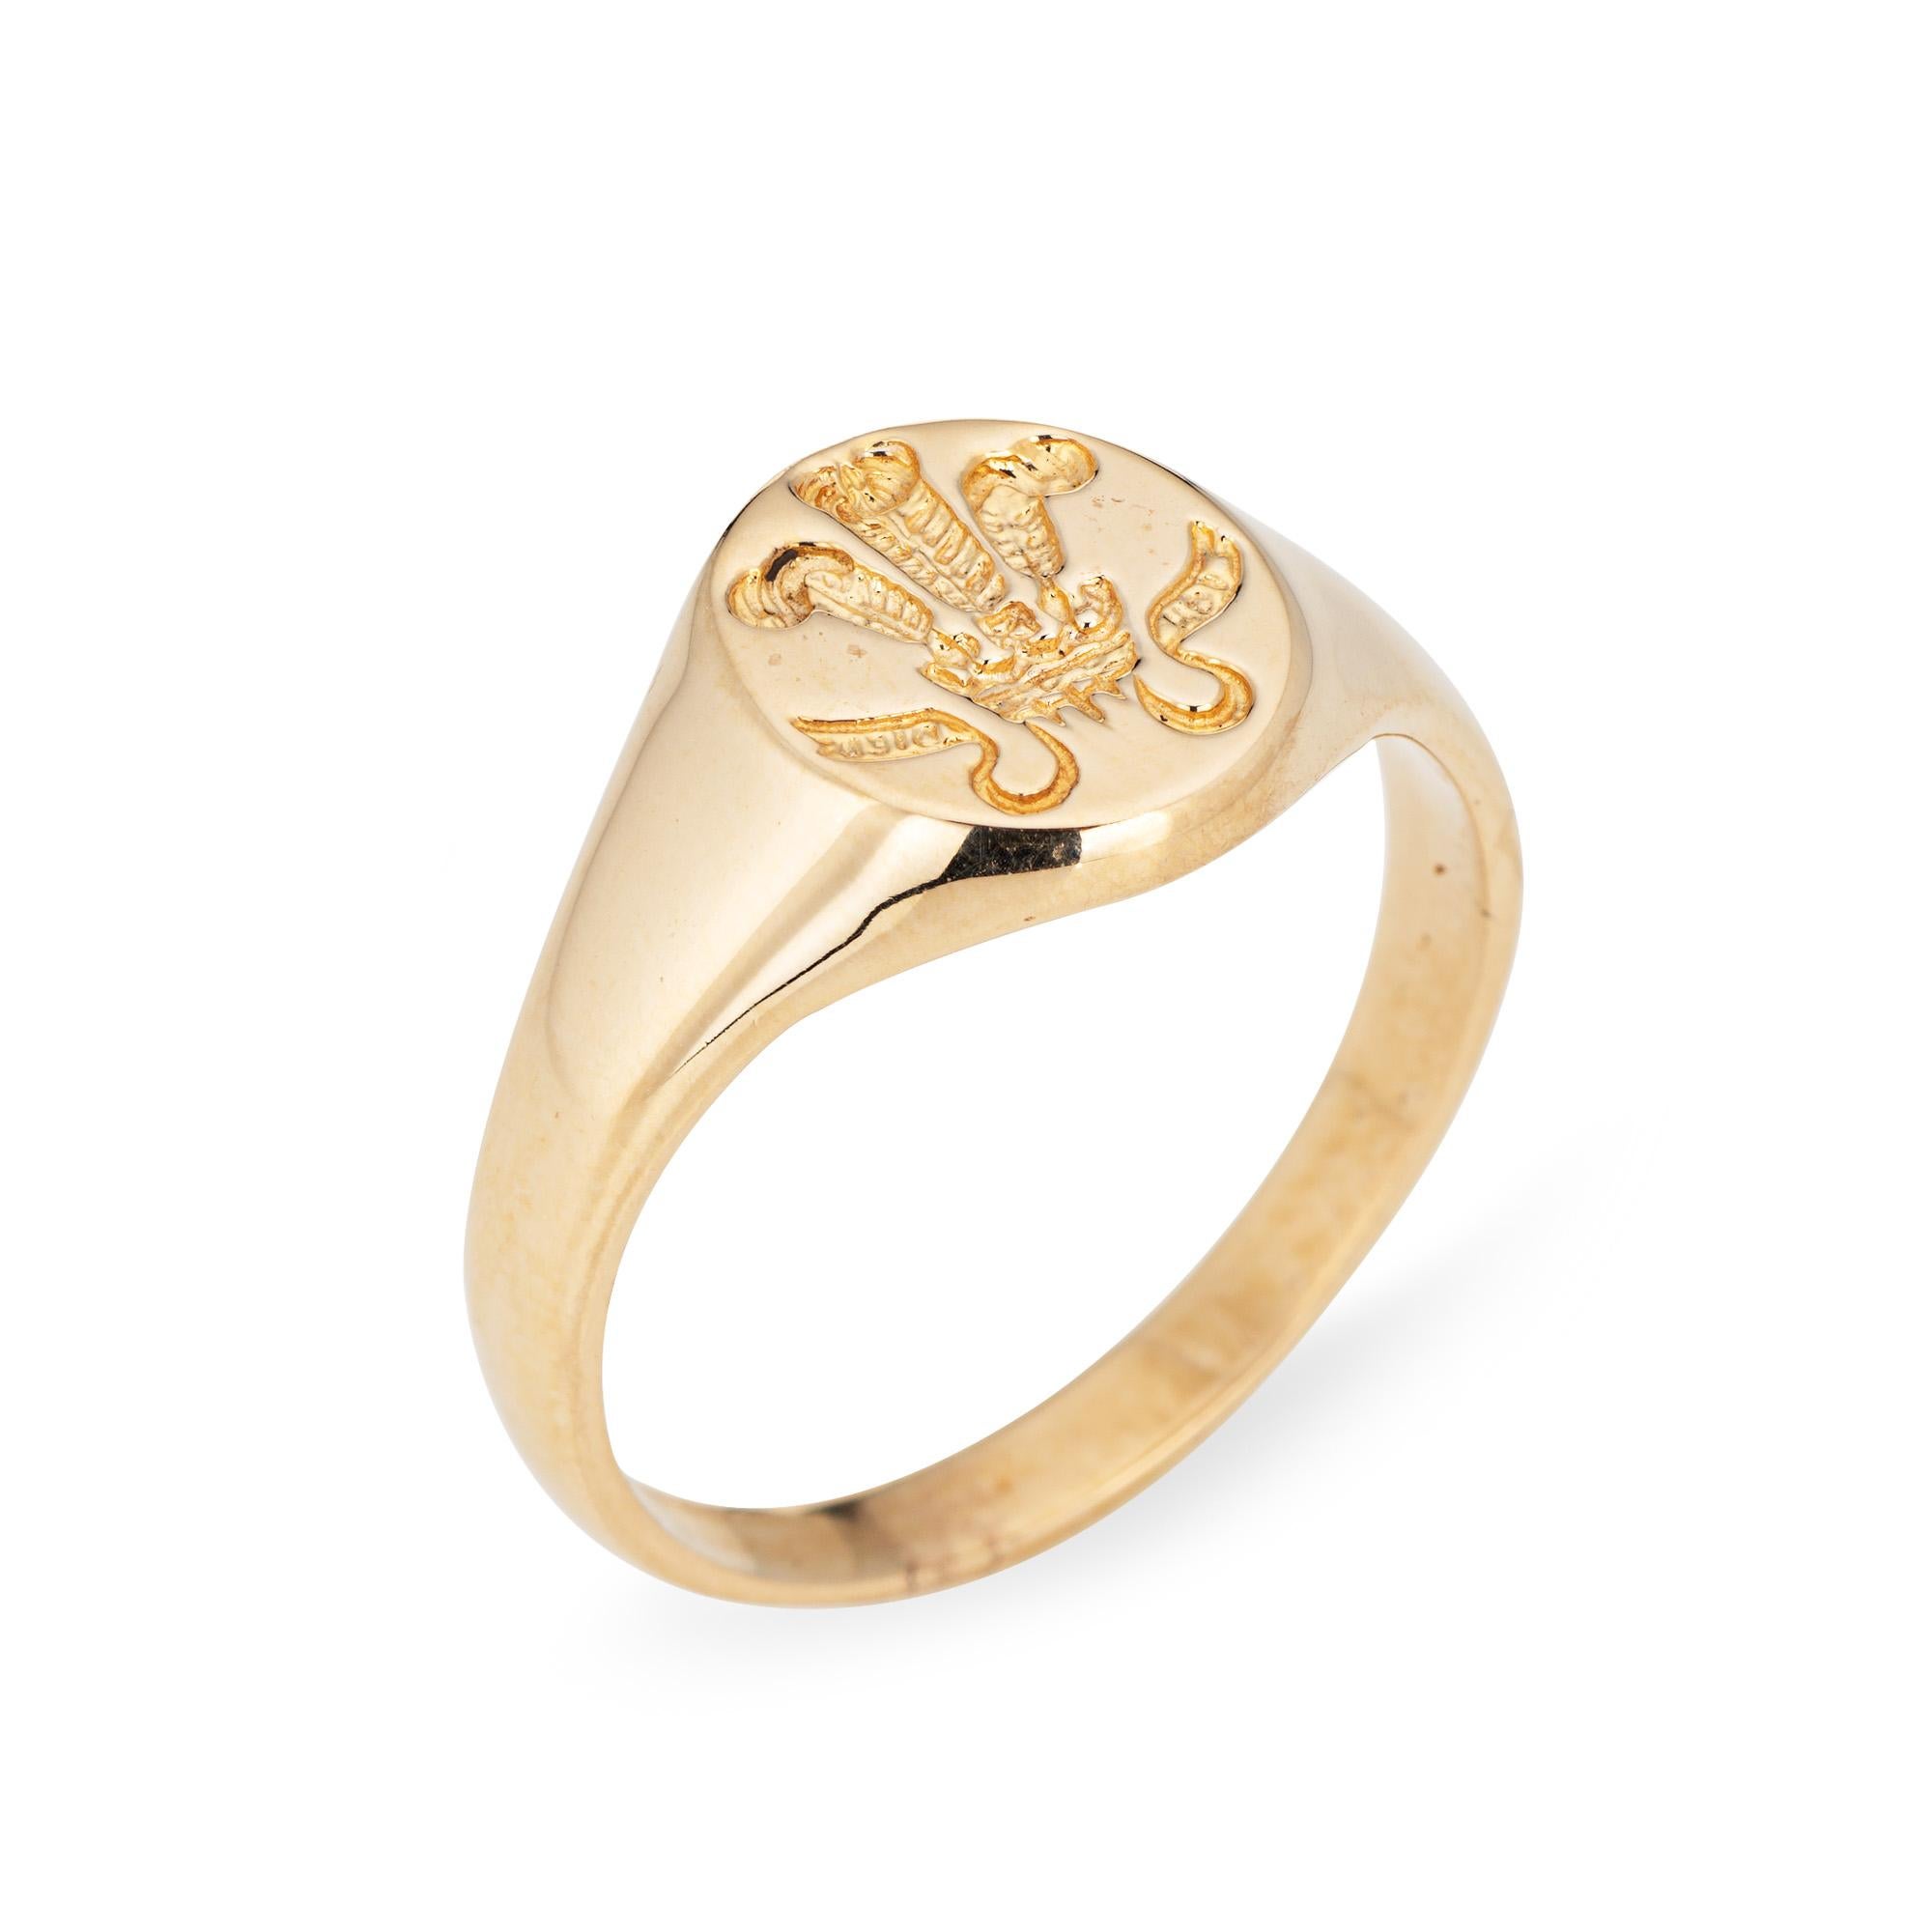 Finely detailed vintage Prince of Wales feathers signet ring crafted in 9 karat yellow gold. 

The signet ring depicts the Prince of Wales feathers, the heraldic badge of the Prince of Wales. It consists of three white feathers emerging from a gold